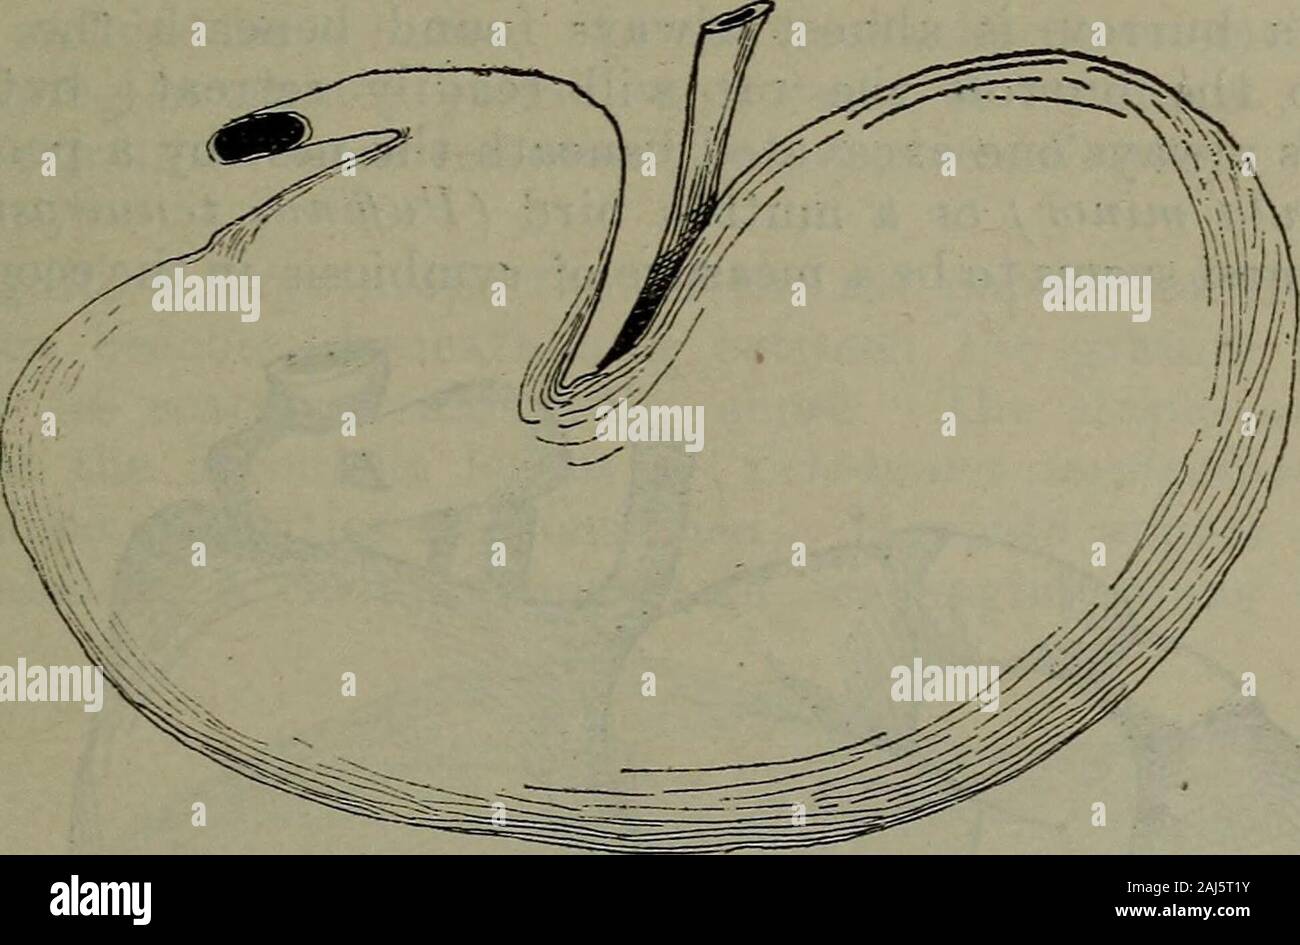 Transactions and proceedings of the Royal Society of South Australia (Incorporated) . Fig. 5. Leporillus jonesi. The palate and upper teeth to show the incisive papilla and the palate ridges. by the urethra; and externally the two sexes are very similarin young animals. The stomach (see fig. 6) is extremely large, and is verydistinctly marked out into two chambers by a frilled edge of 187 heaped-up epithelium. The first pouch is oesophageal inorigin, and the second is the true pyloric stomach. Thecaecum (see fig. 7) is enormous; the caput caeci is coiled uponitself; and the whole organ occupie Stock Photo